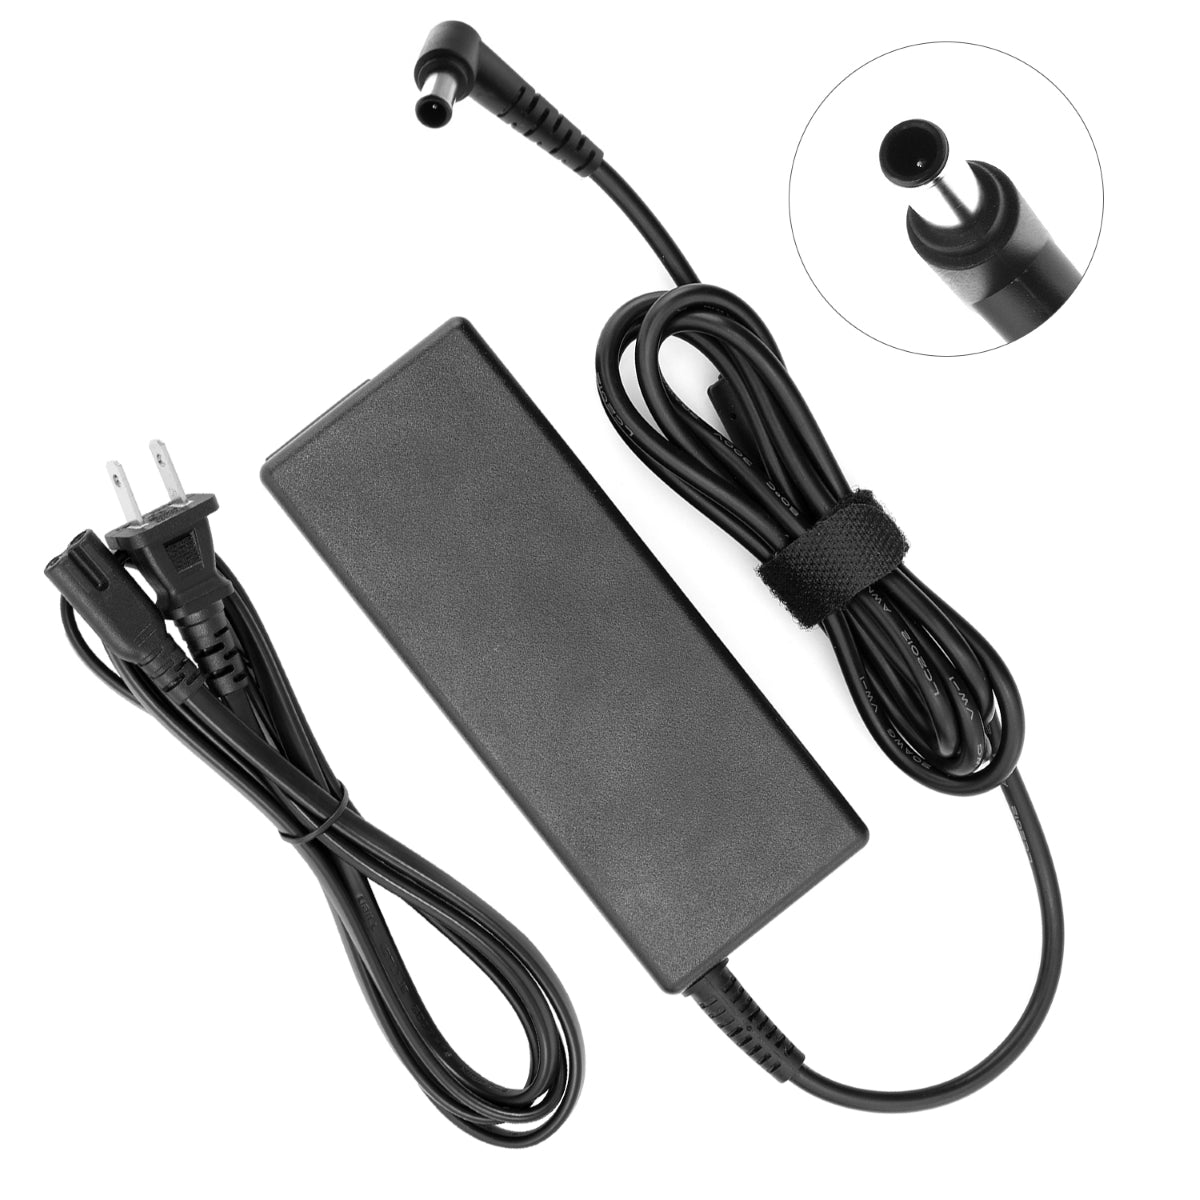 Power Adapter for LG 27GN650-B Monitor TV